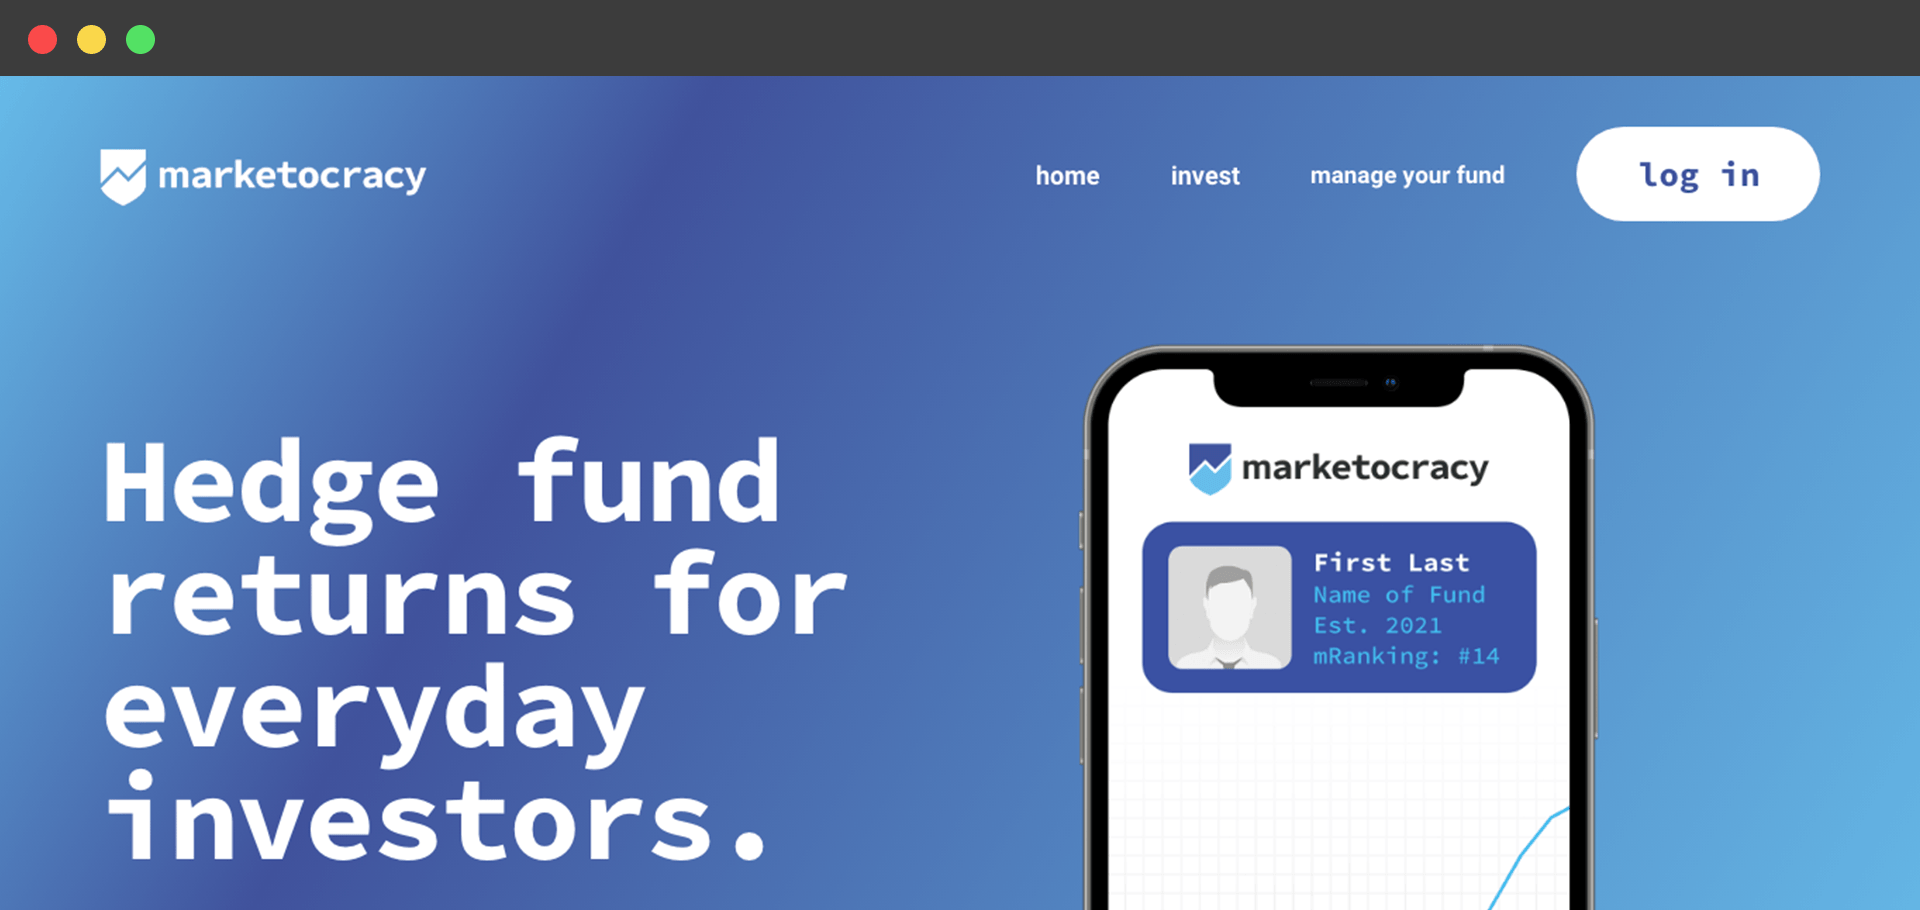 A screenshot of the website for hedge fund returns for everyday investors.